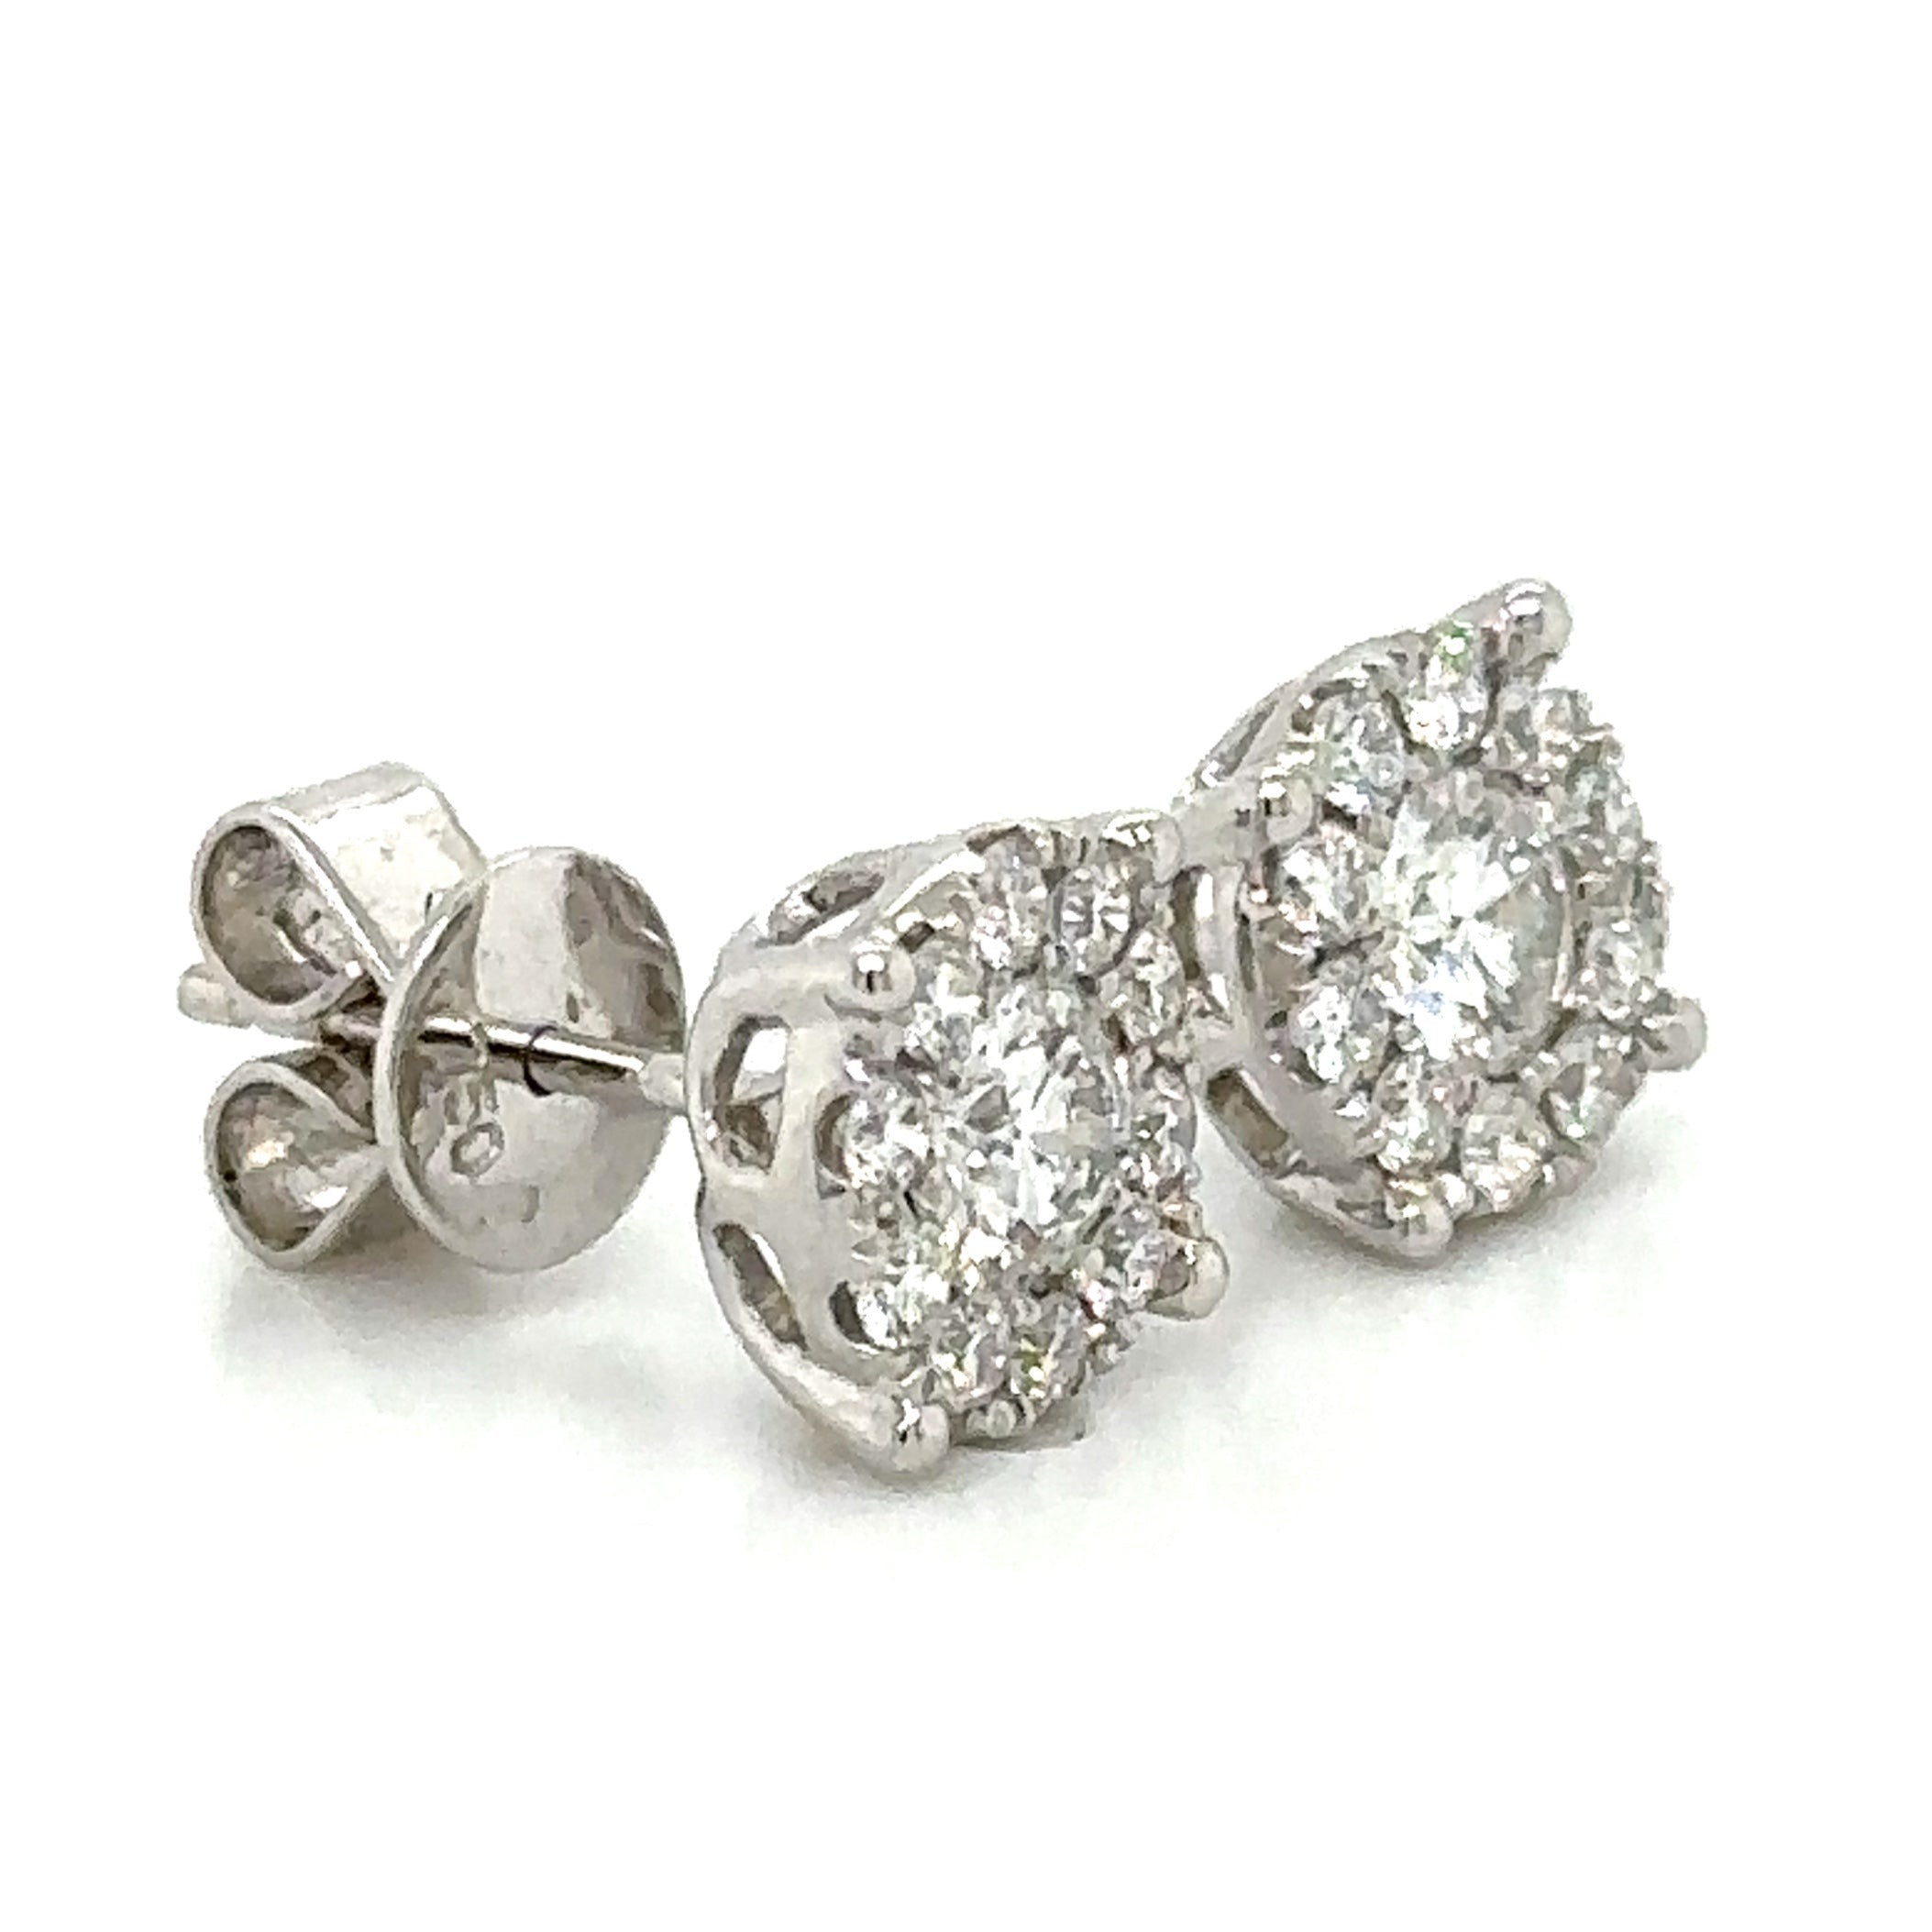 Diamond Cluster Invisible -set Stud Earrings 0.85ct tw